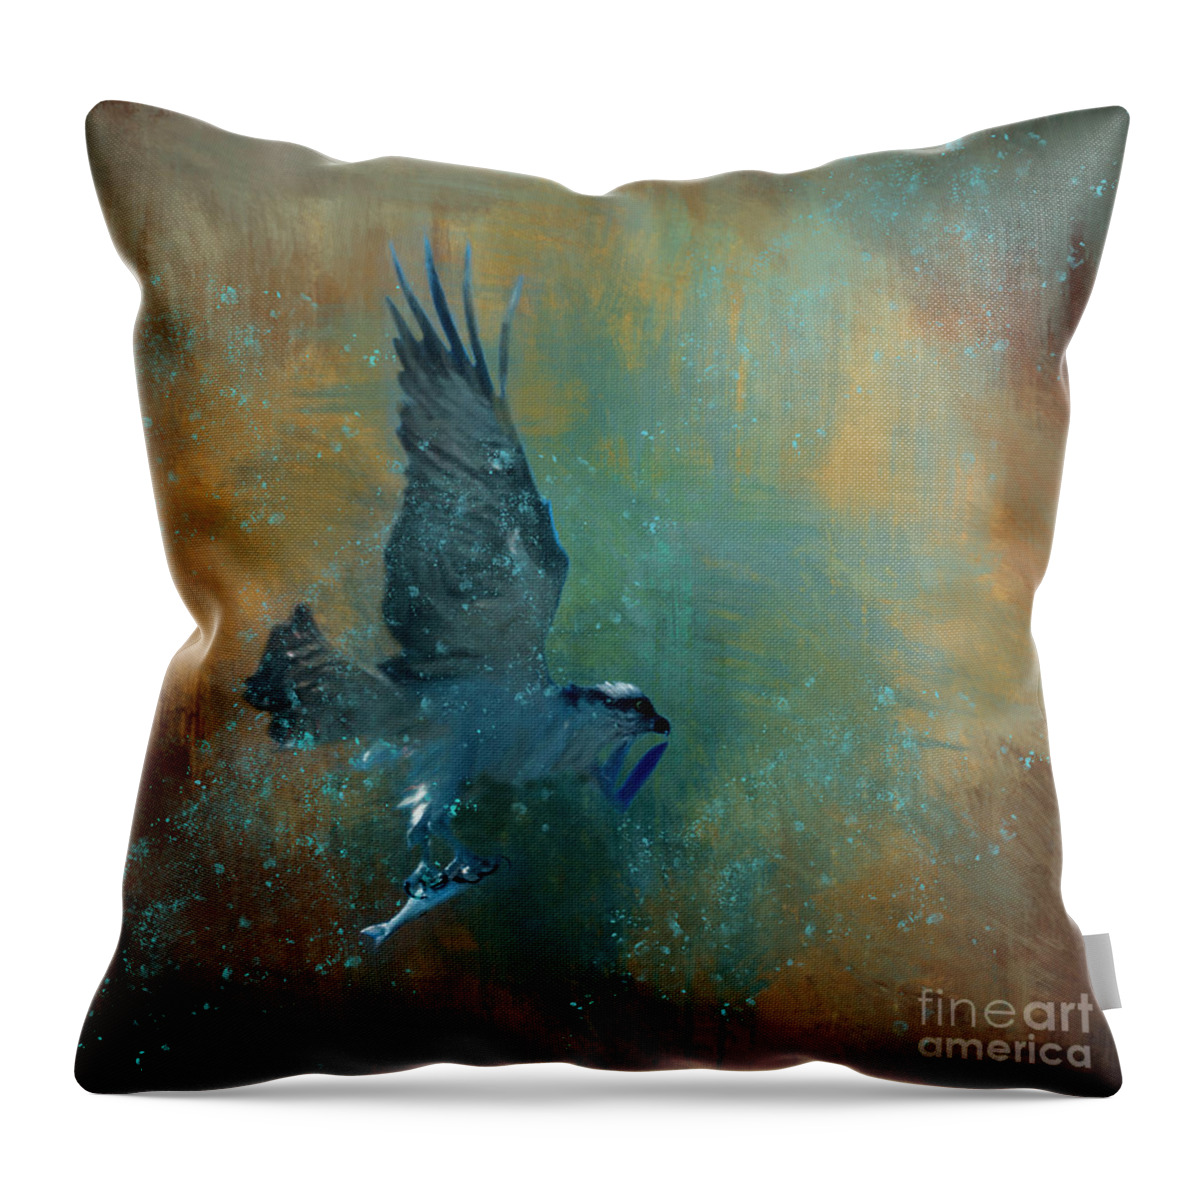 Wildlife Throw Pillow featuring the mixed media Fish Day by Marvin Spates